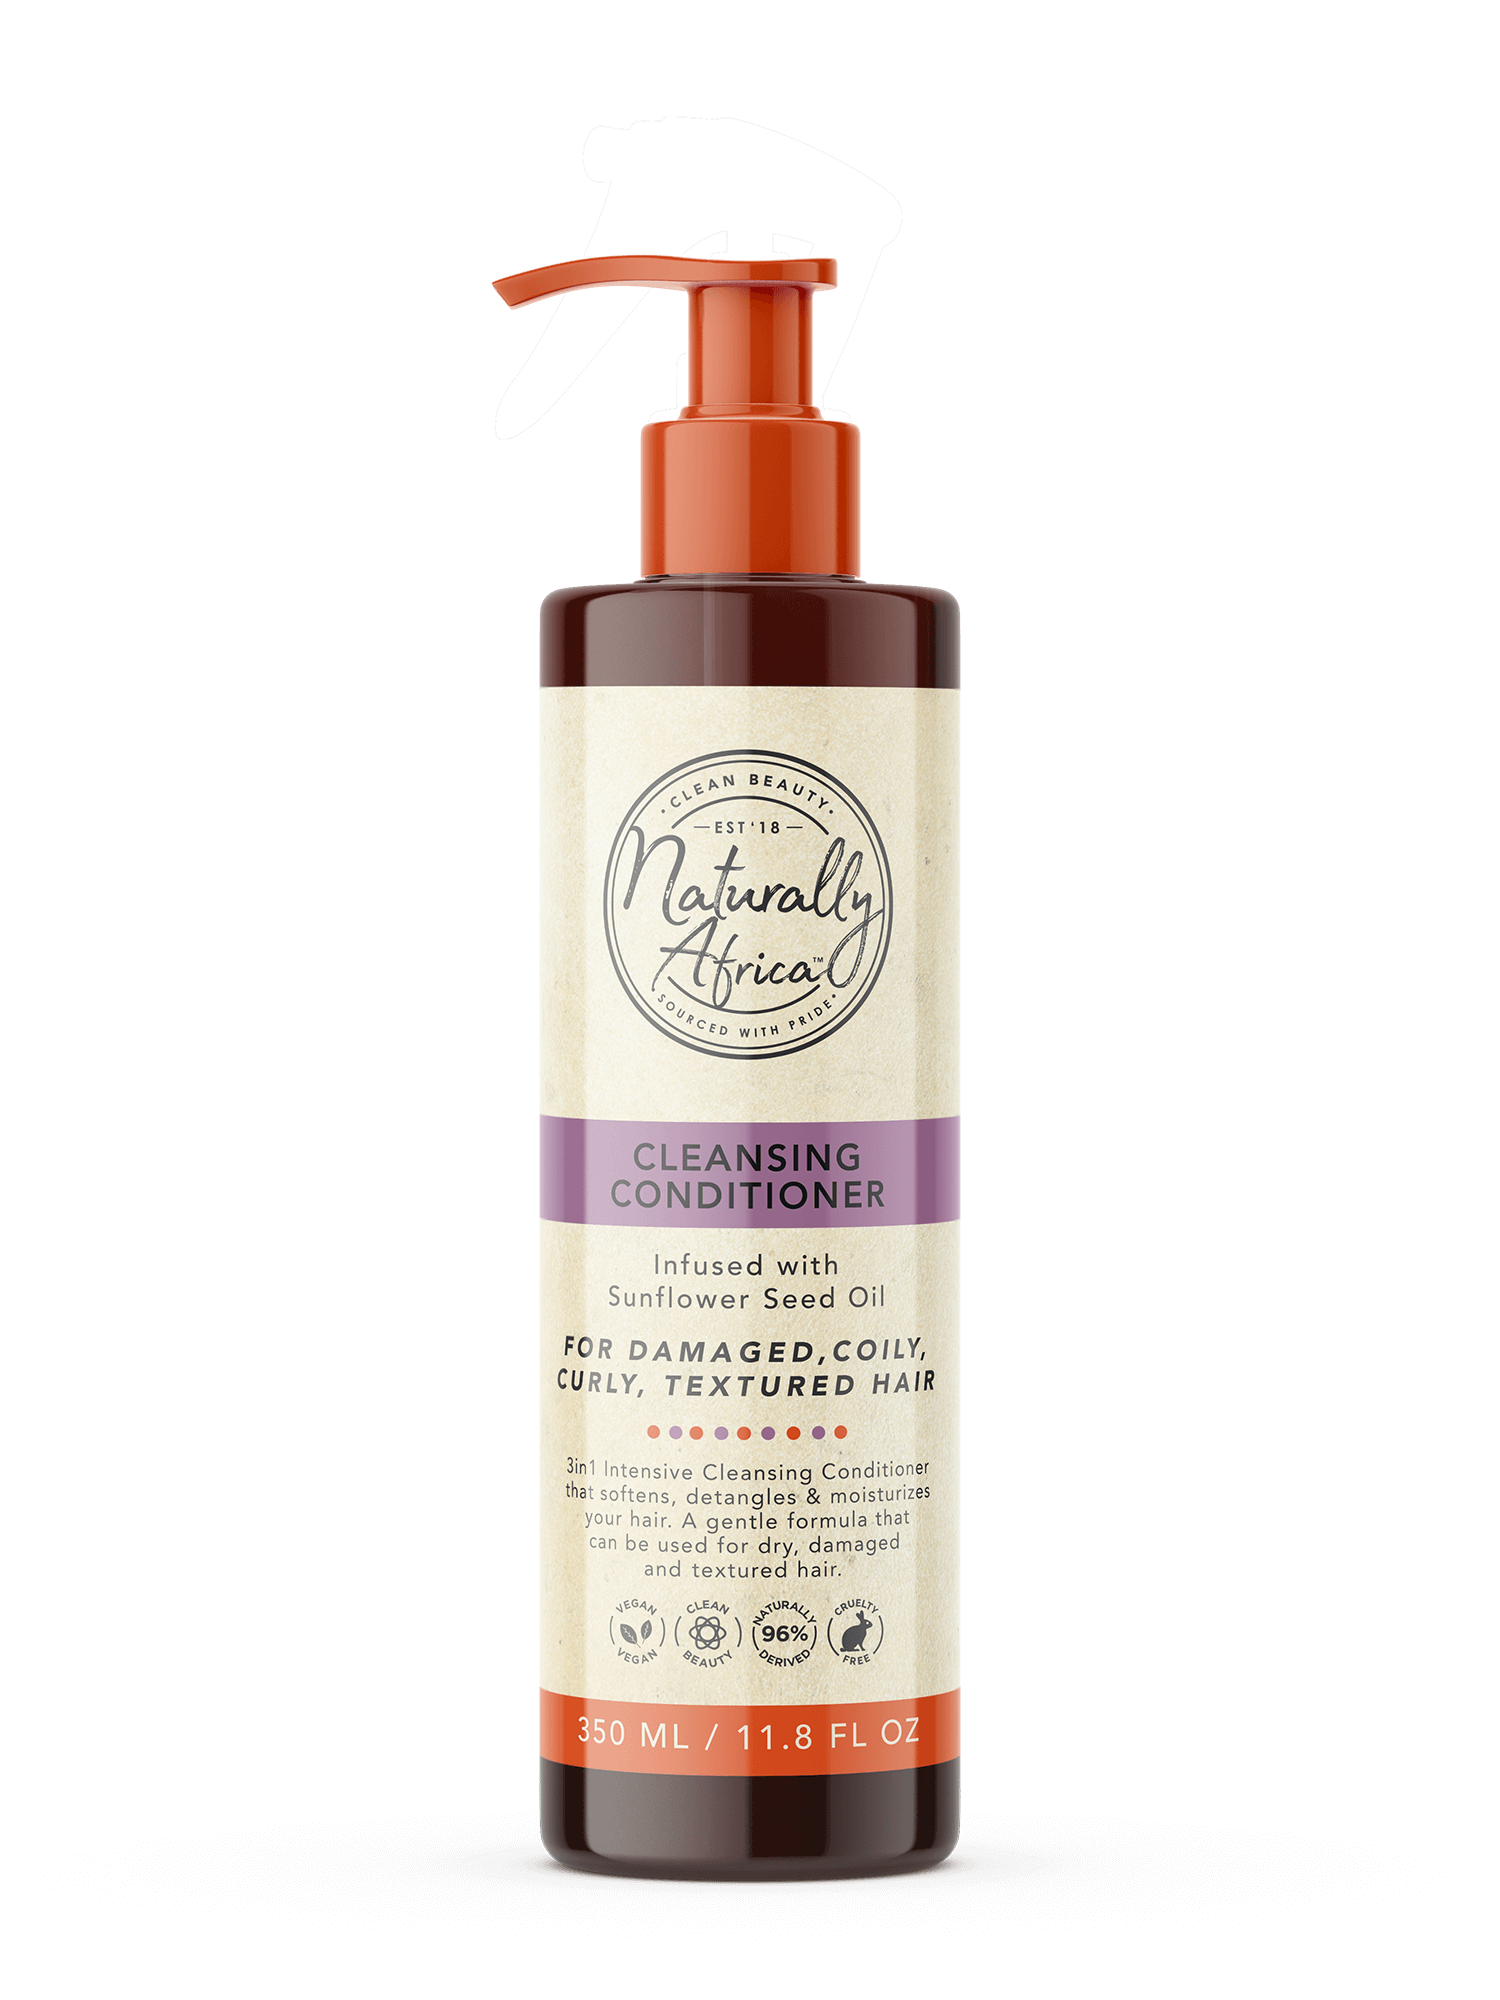 Cleansing Conditioner – Naturally Africa